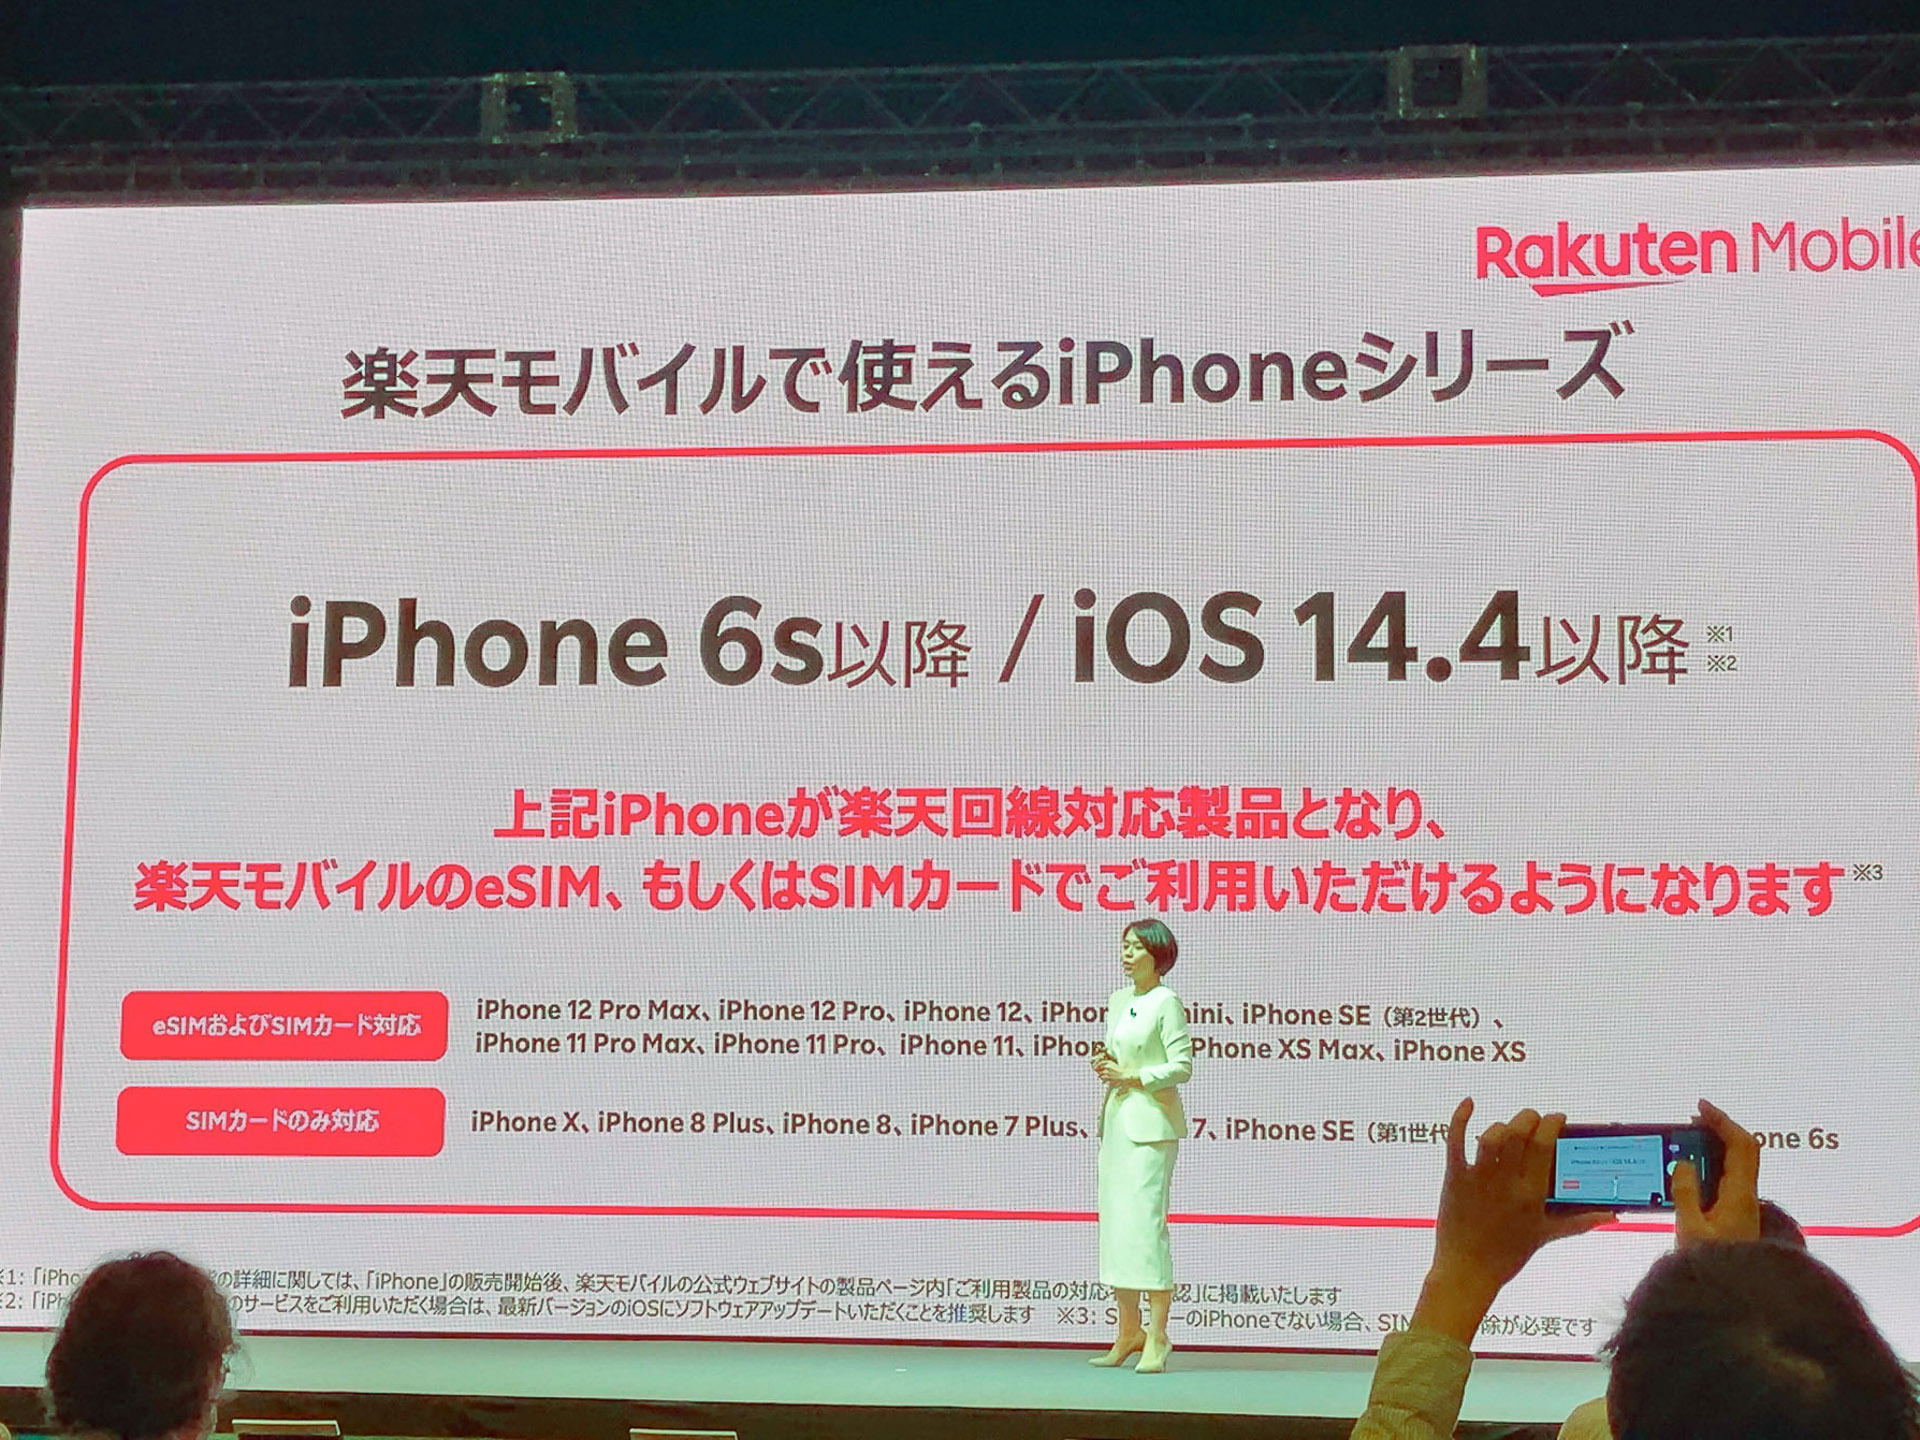 Rakuten Mobile Finally Officially Supports The Iphone Series What Has Changed Keitai O Clock